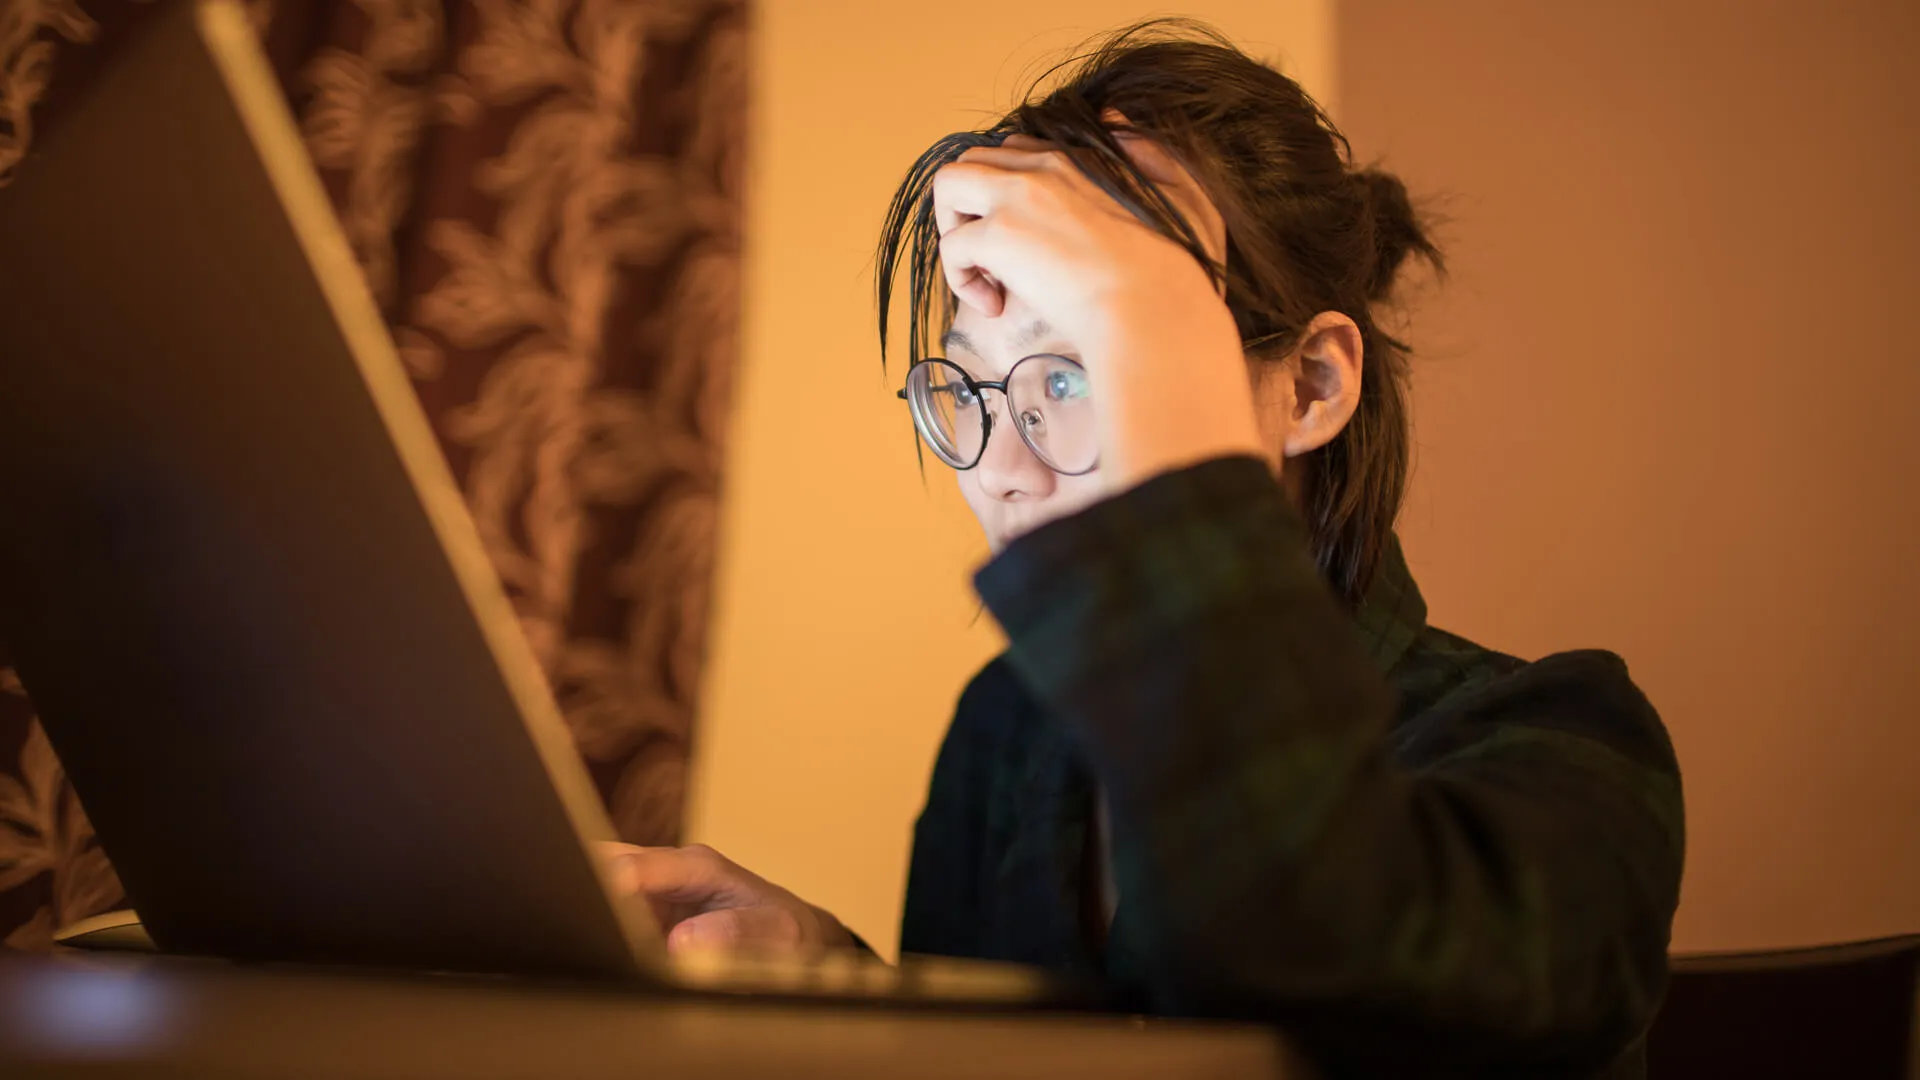 female college students using laptop late at night in search for information online.